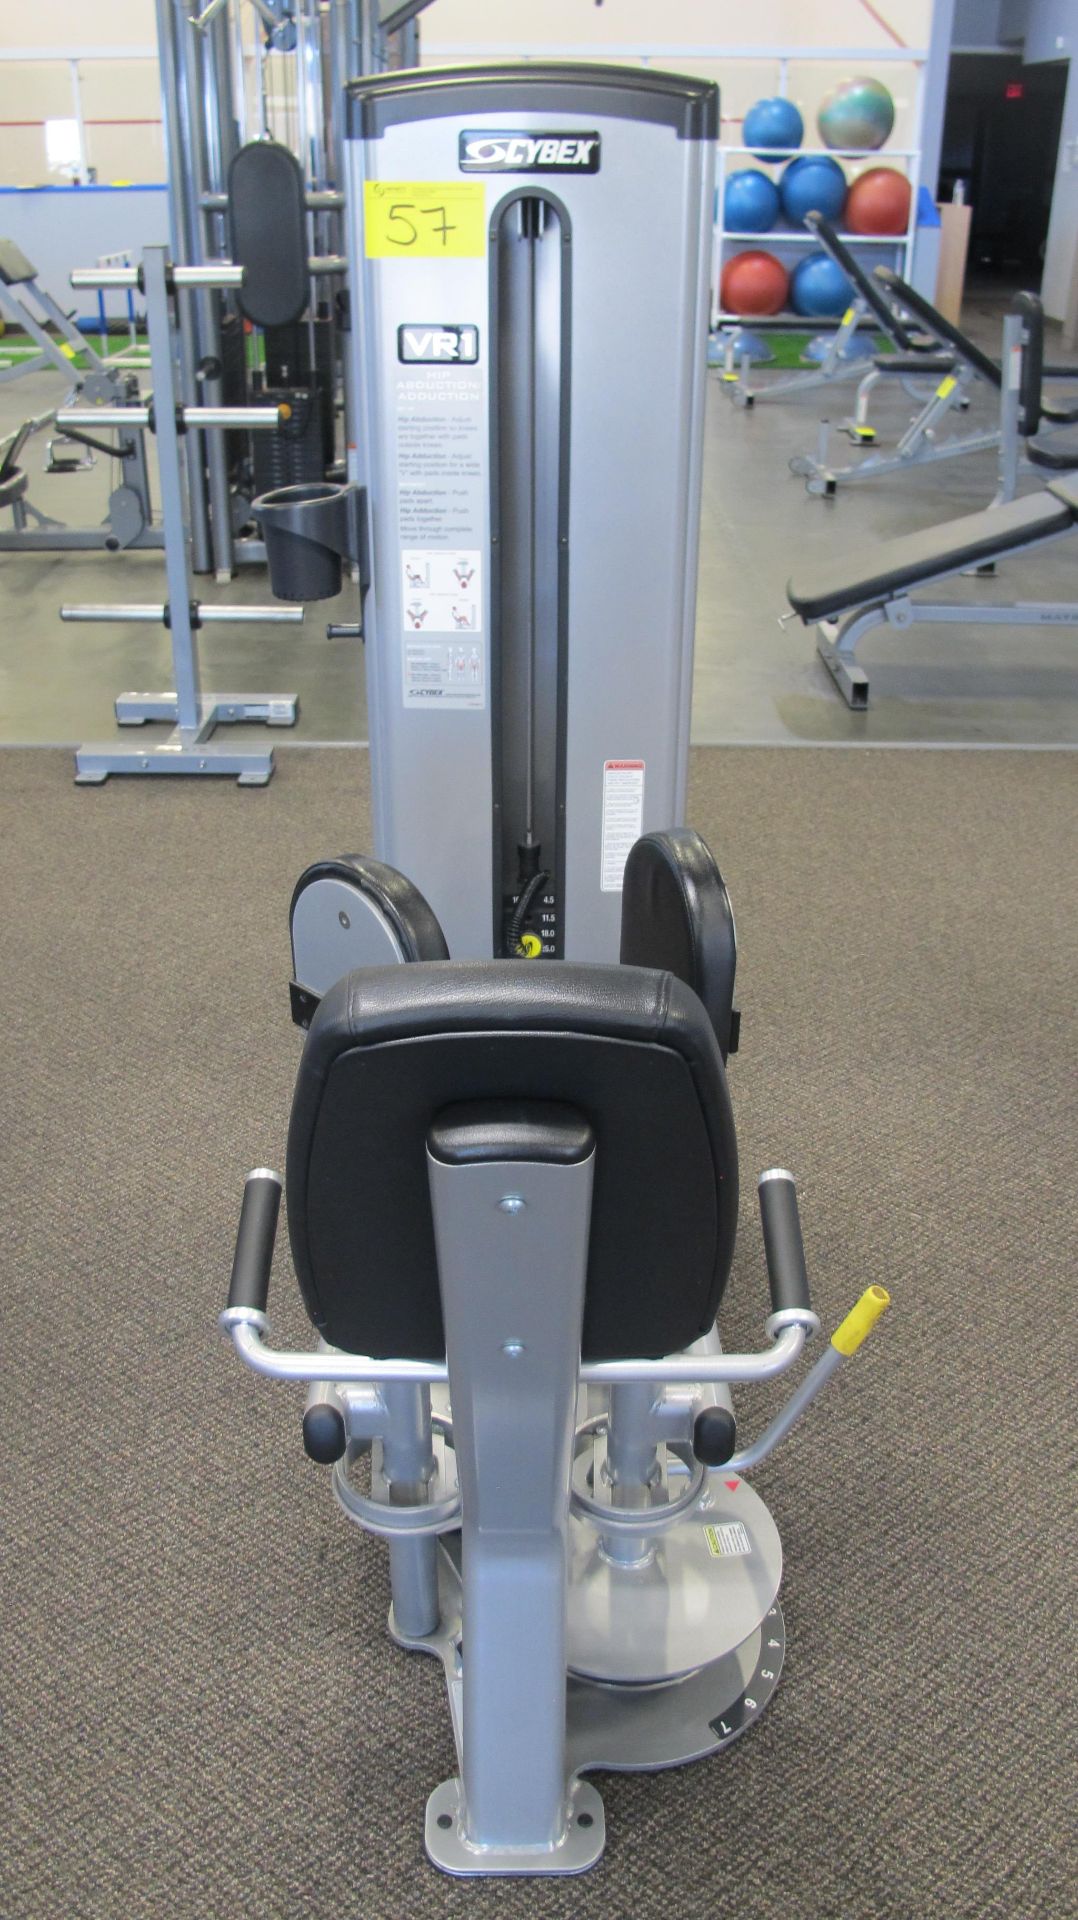 CYBEX VR1 13180-90 Hip Abduction/Adduction Machine - Weight Stack 145lbs - Image 3 of 8